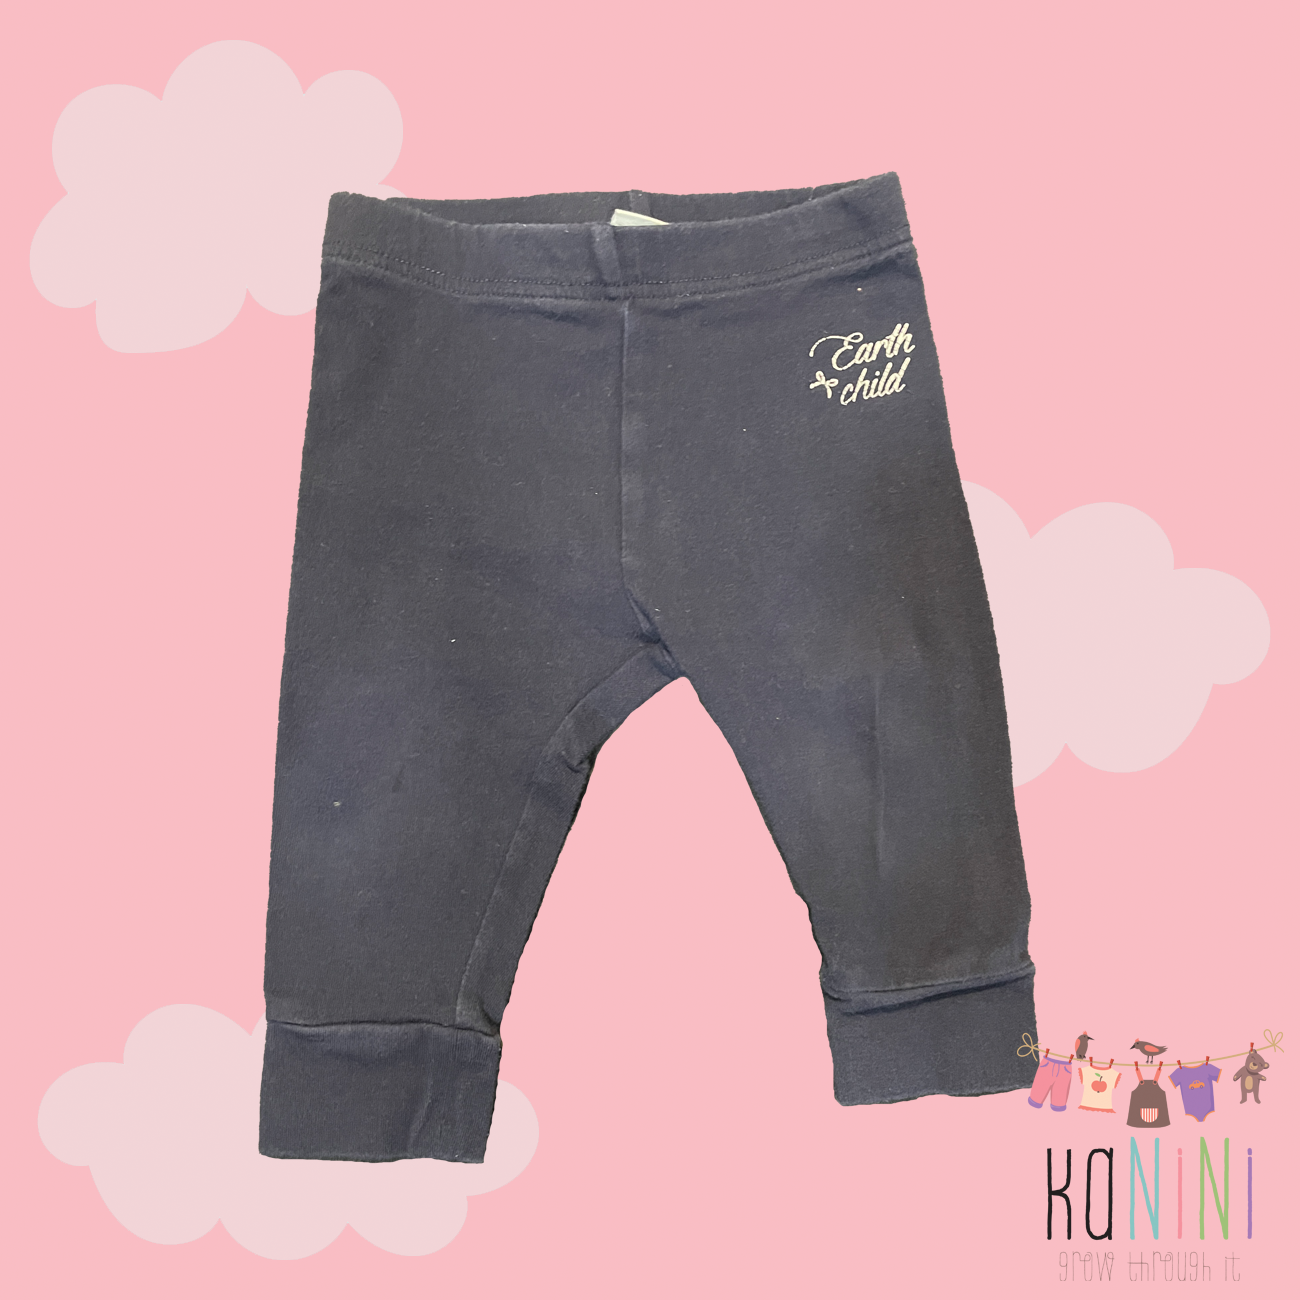 Featured image for “Earthchild 6 - 12 Months Girls Navy Leggings”